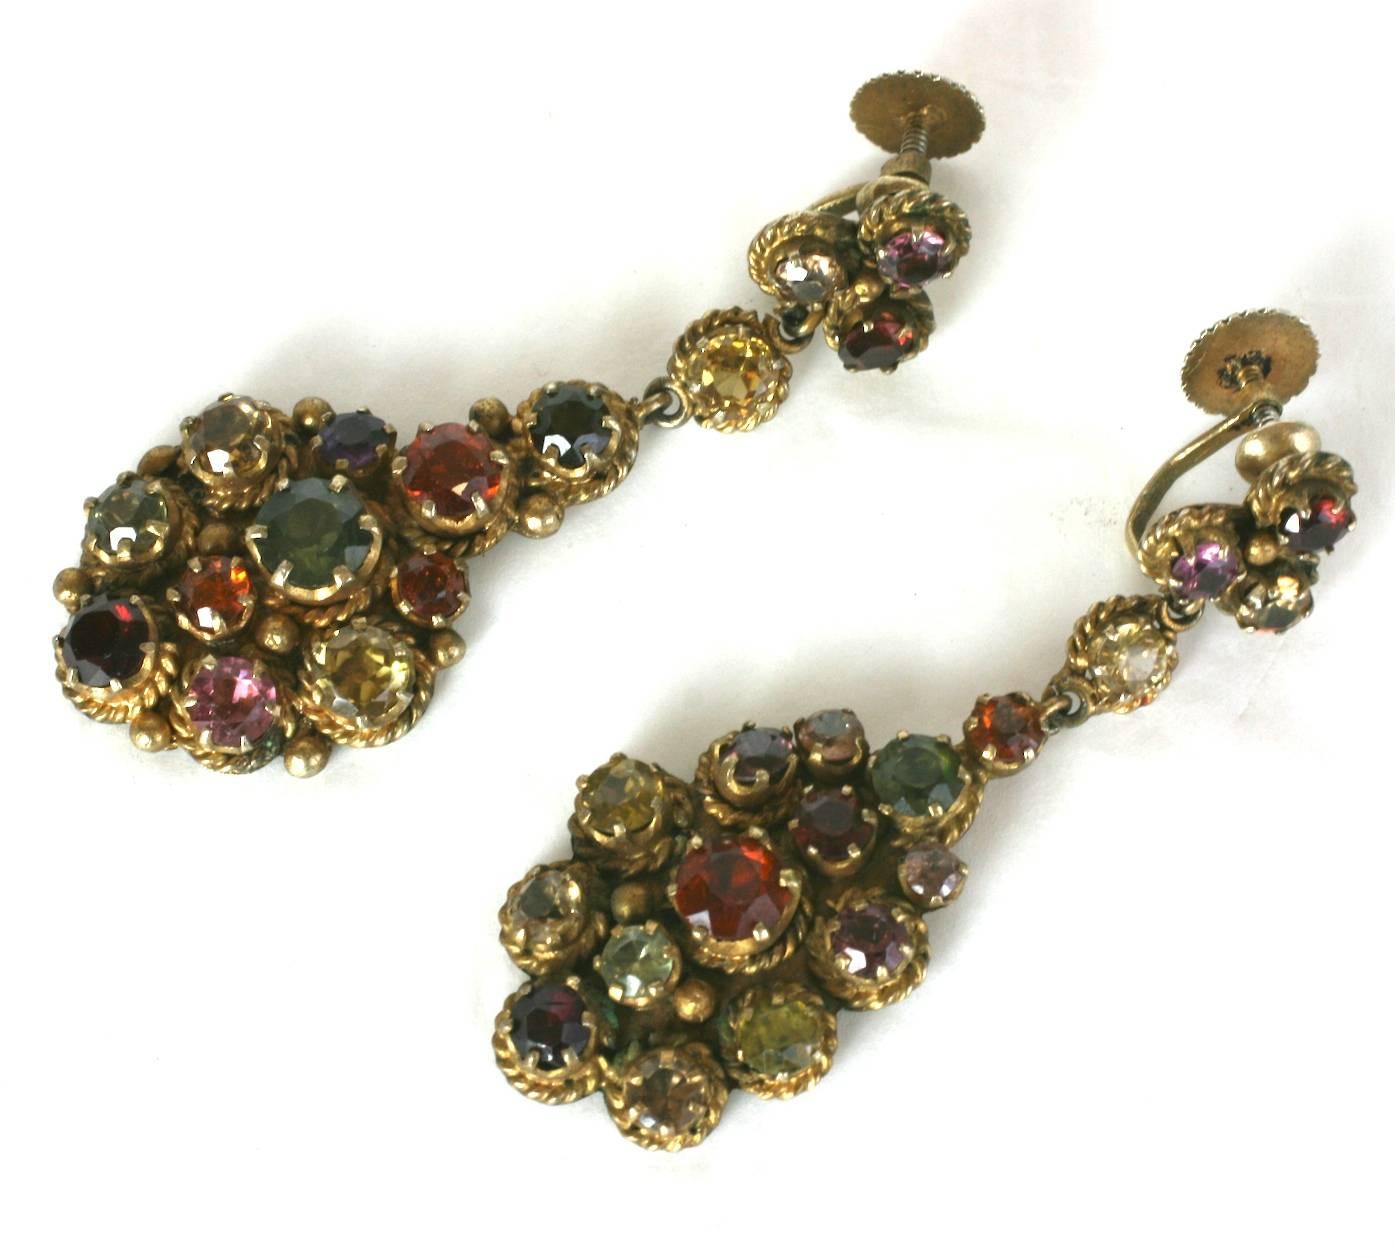 Antique Indian Gemstone Earrings set with a mix of pastes and semi precious stones. Set in gilded silver.
These are not completely symmetrical, as they are hand made. The distinction is small, but, one earring has a bezel around the olivine colored